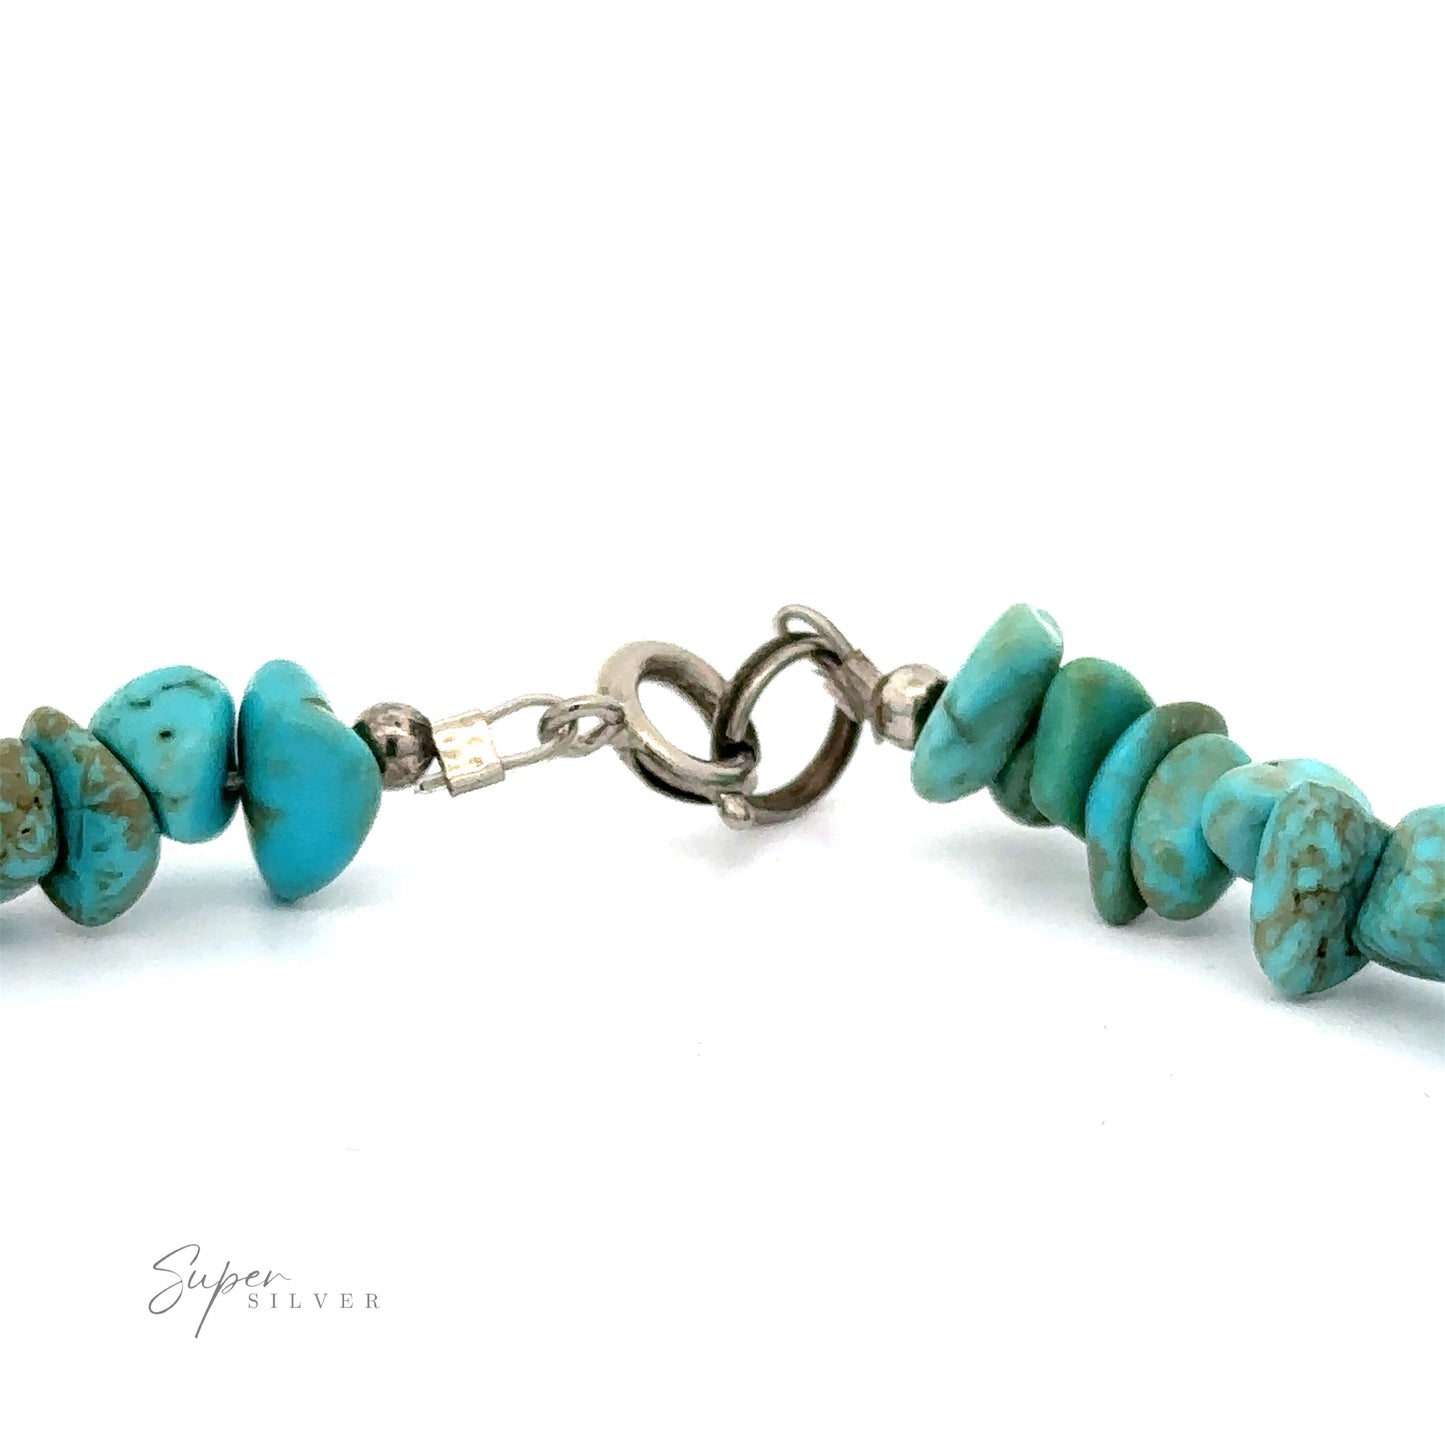 
                  
                    A Southwest Colorado Turquoise Chip Bracelet or Anklet clasp connects a string of irregular turquoise beads, evoking southwest charm against a white background. The partial logo "Super Silver" in the lower left corner hints at its .925 Sterling Silver quality.
                  
                